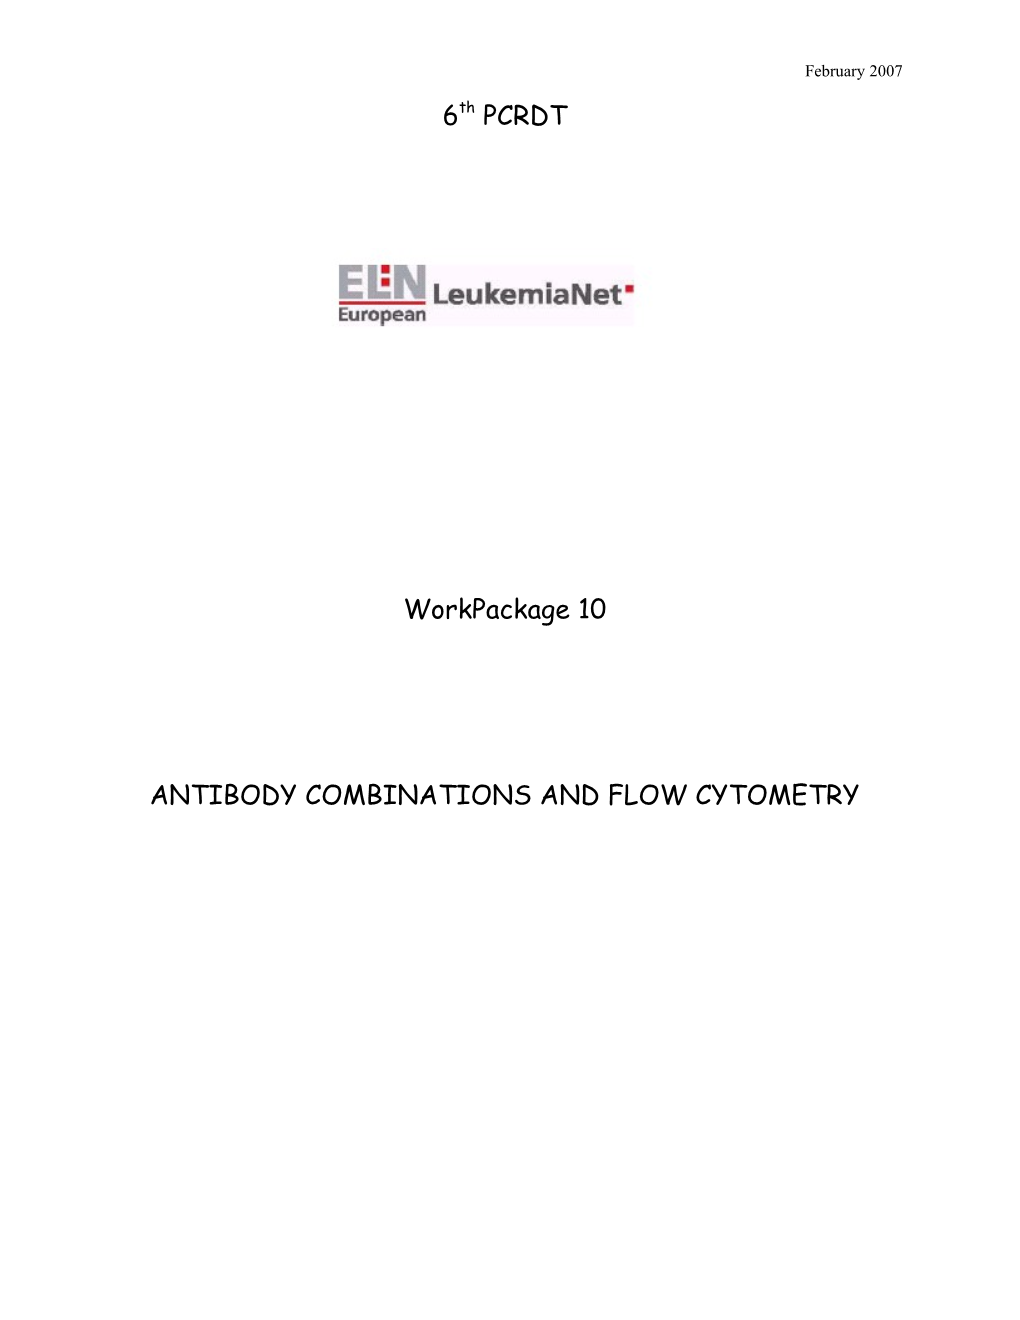 Antibody Combinations and Flow Cytometry